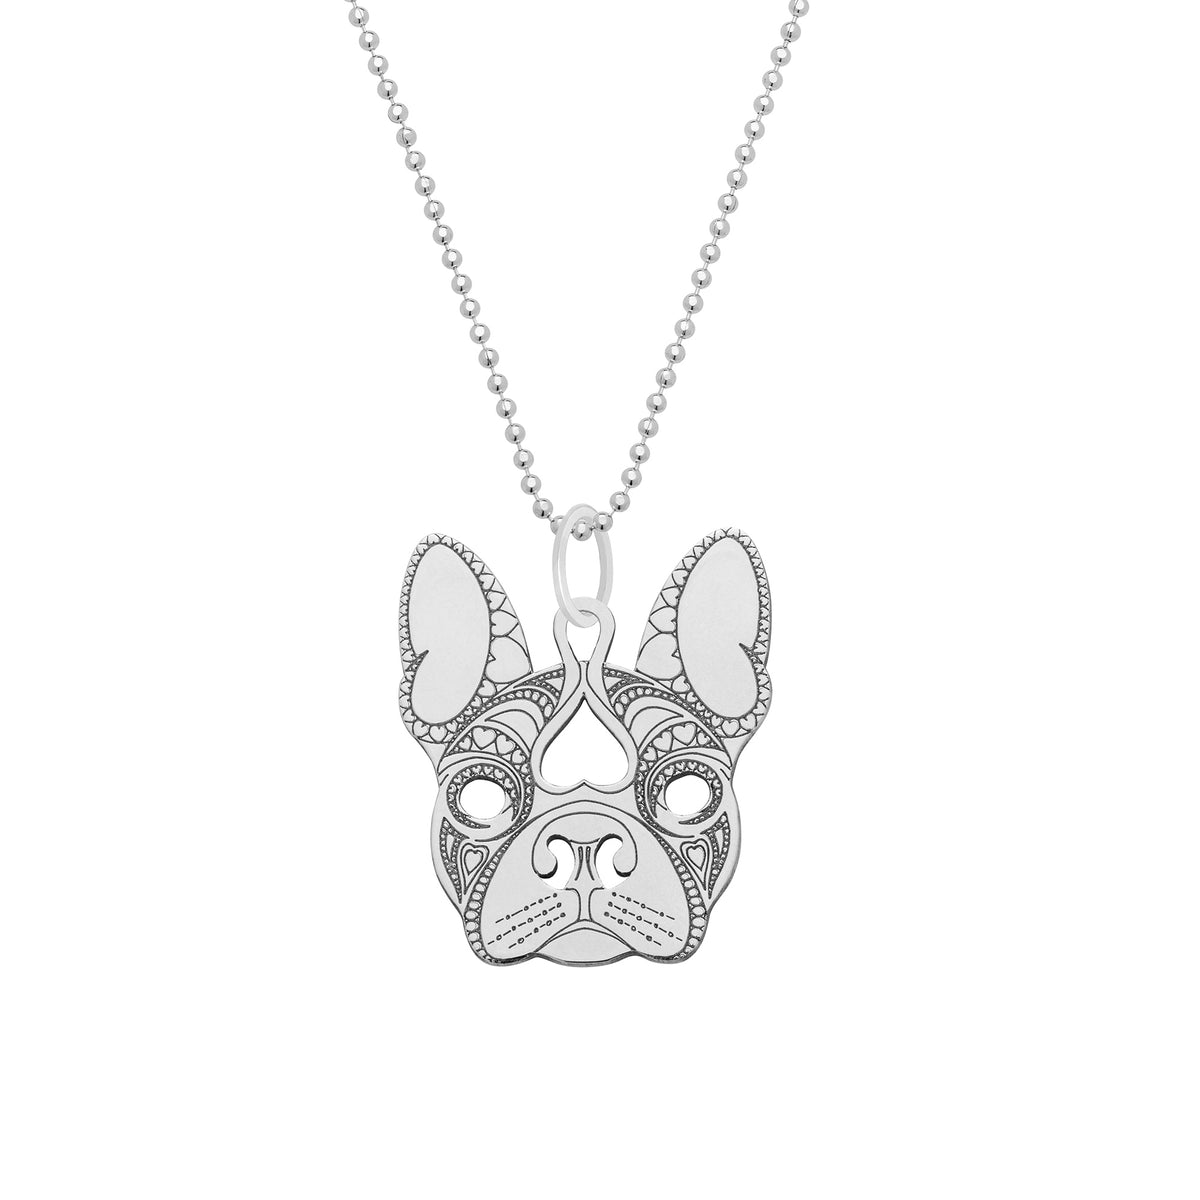 Pug Jewelry - 12 For Sale on 1stDibs | pug jewellery, pug necklace gold,  gold pug necklace